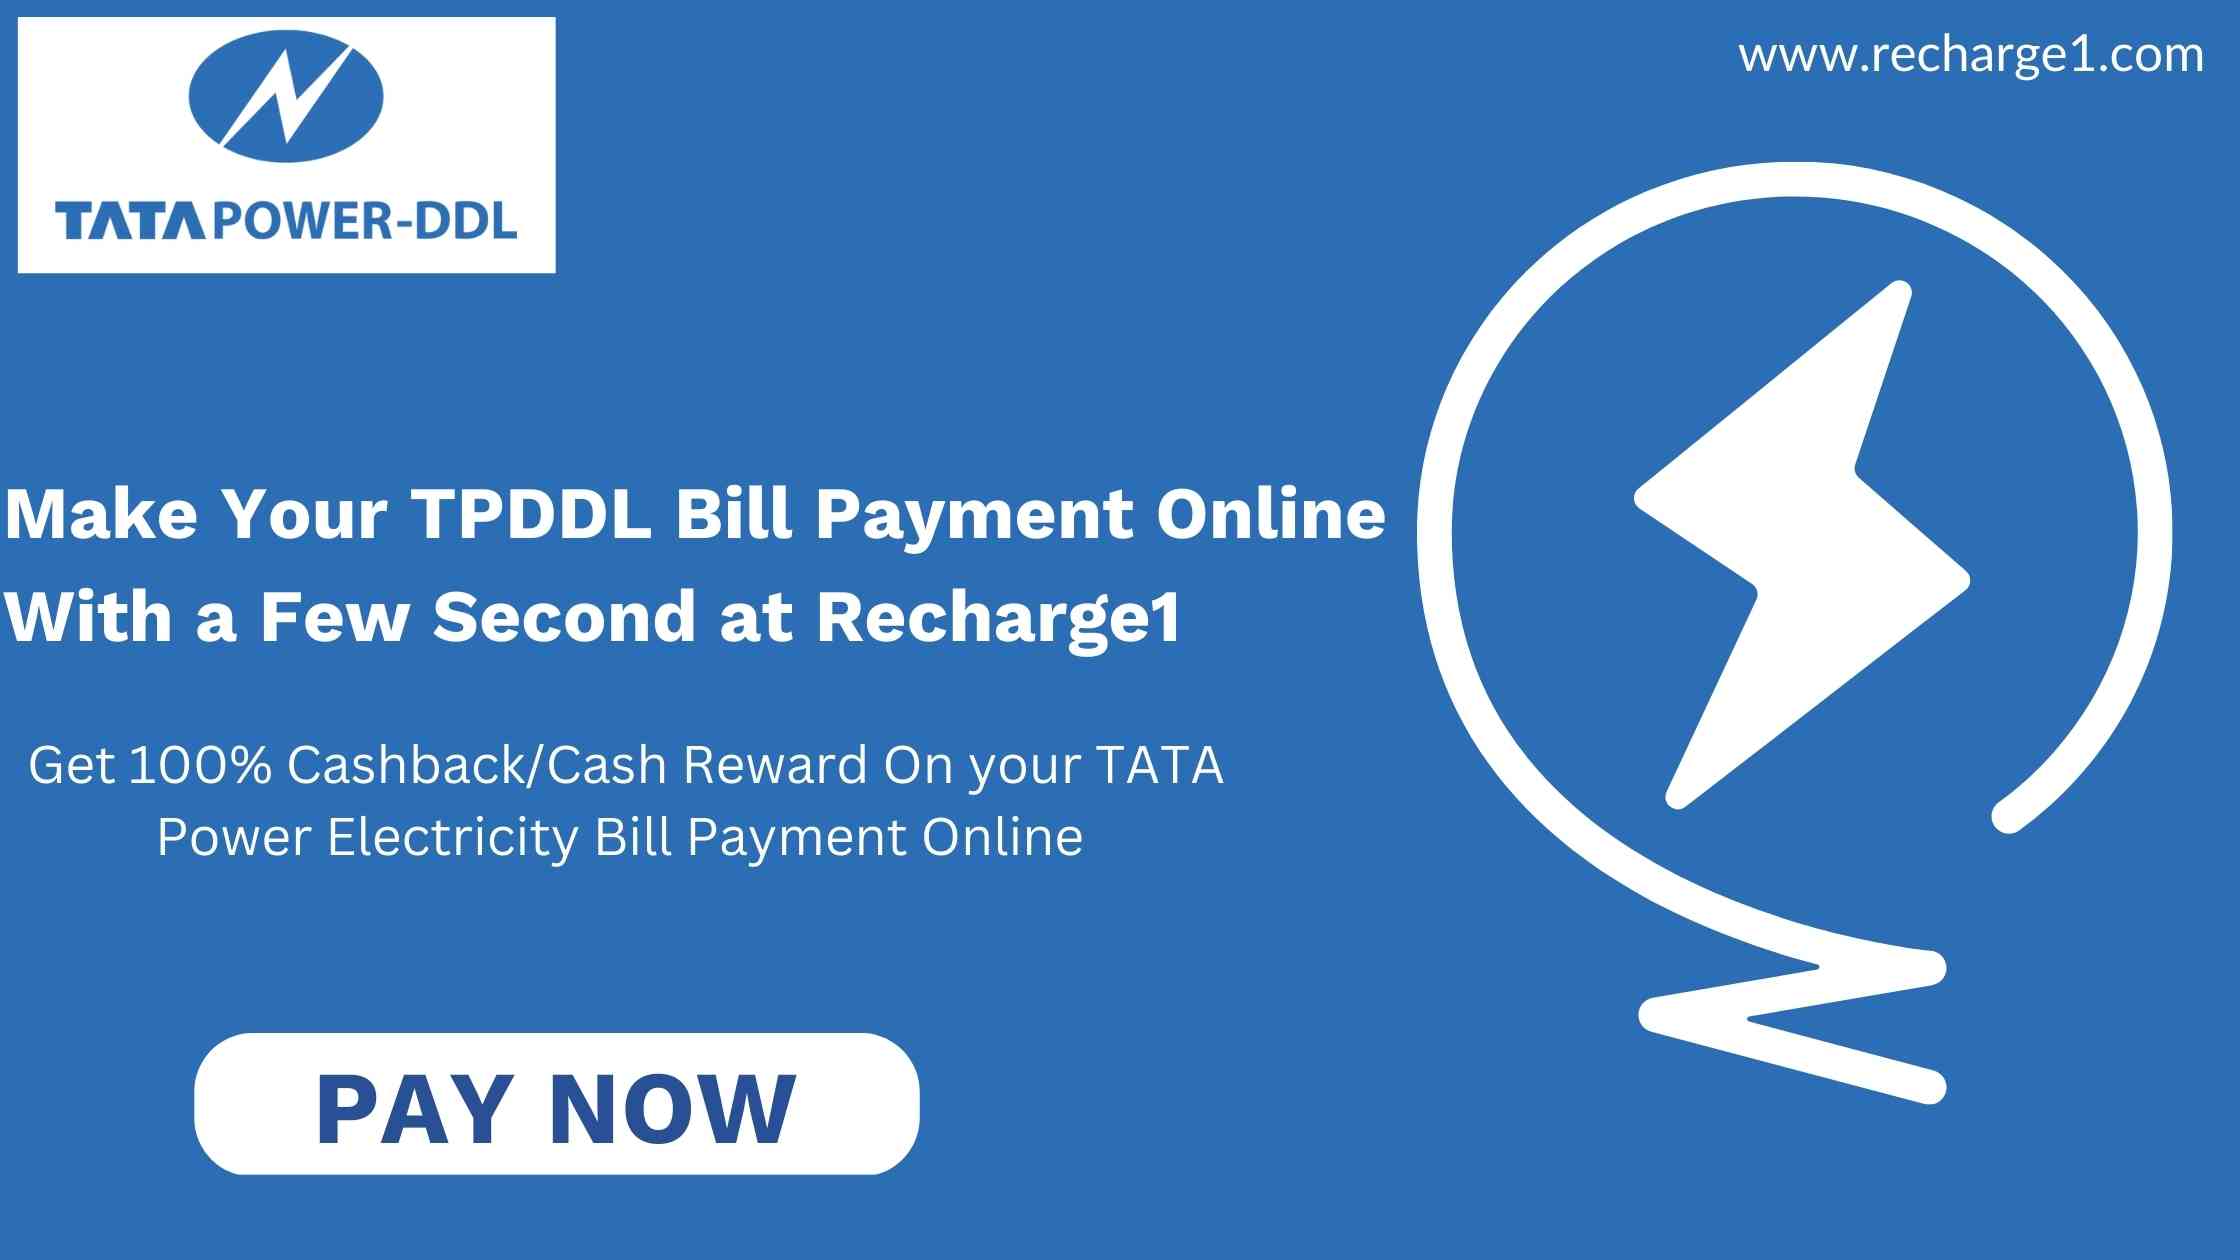 TPDDL Bill Online PaymentOtherAnnouncementsAll Indiaother